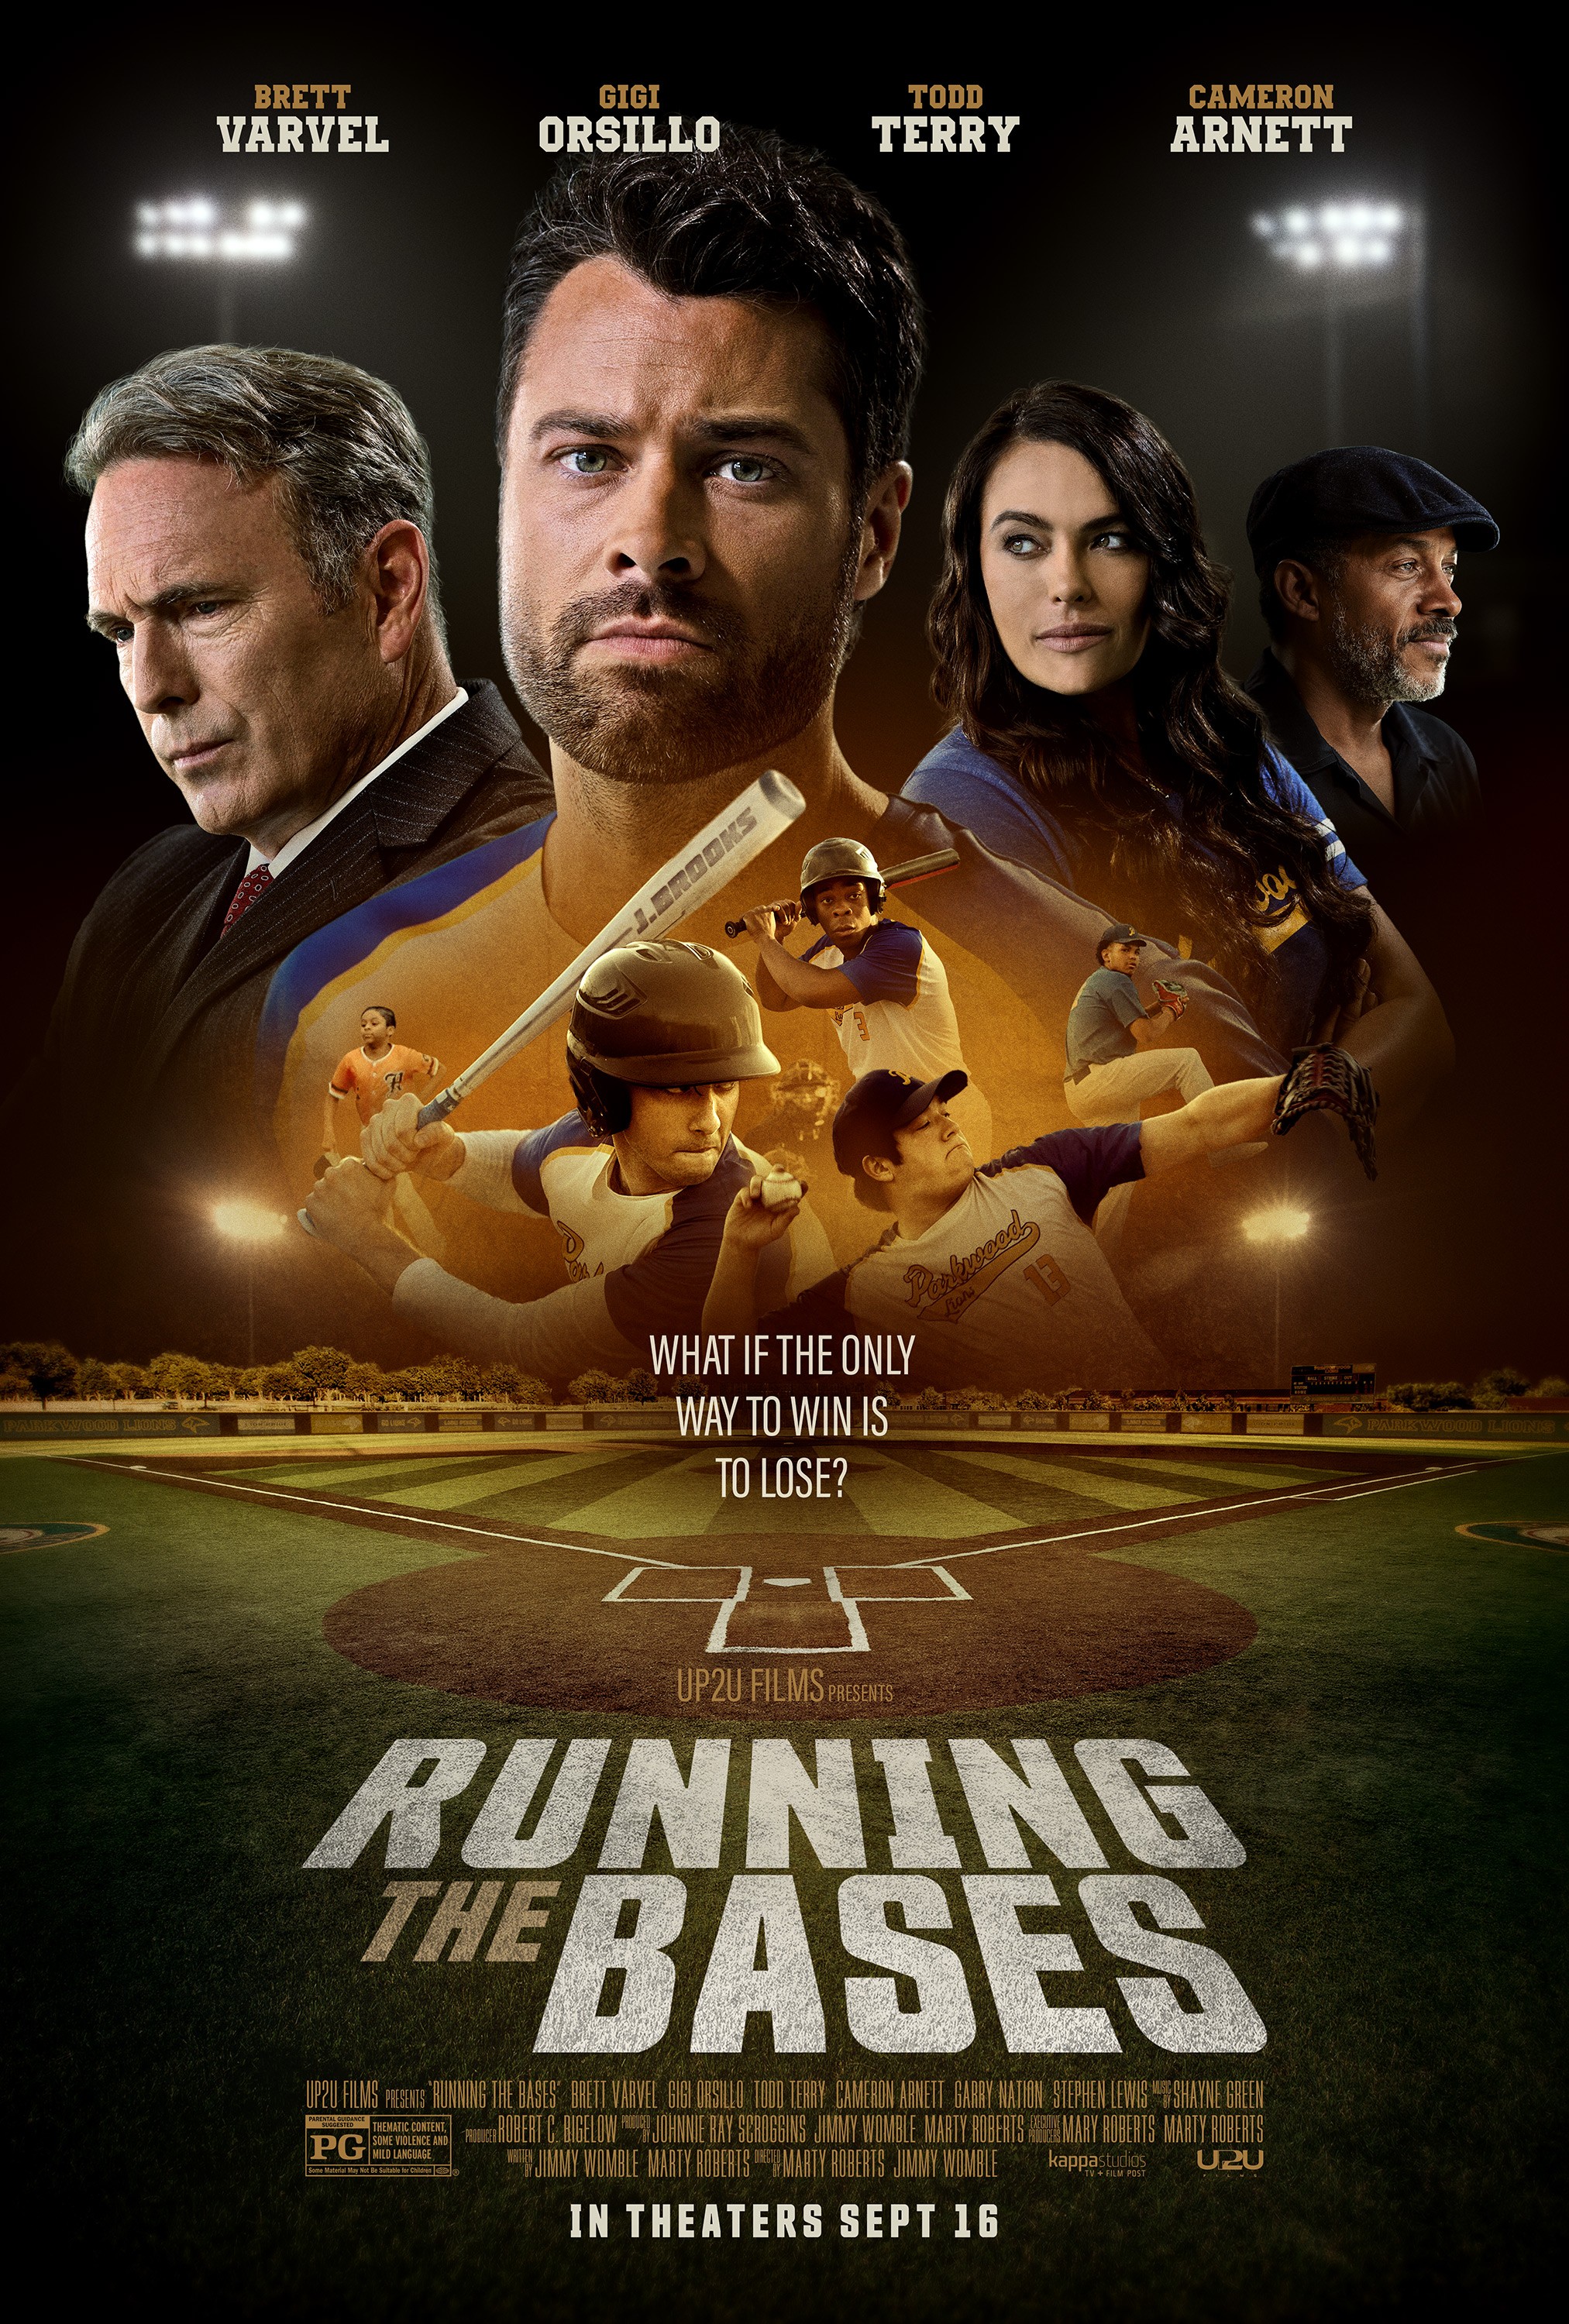 Running.the.Bases.2022.Tamil [Unofficial] 1080p 720p 480p WEB-DL Online Stream 1XBET